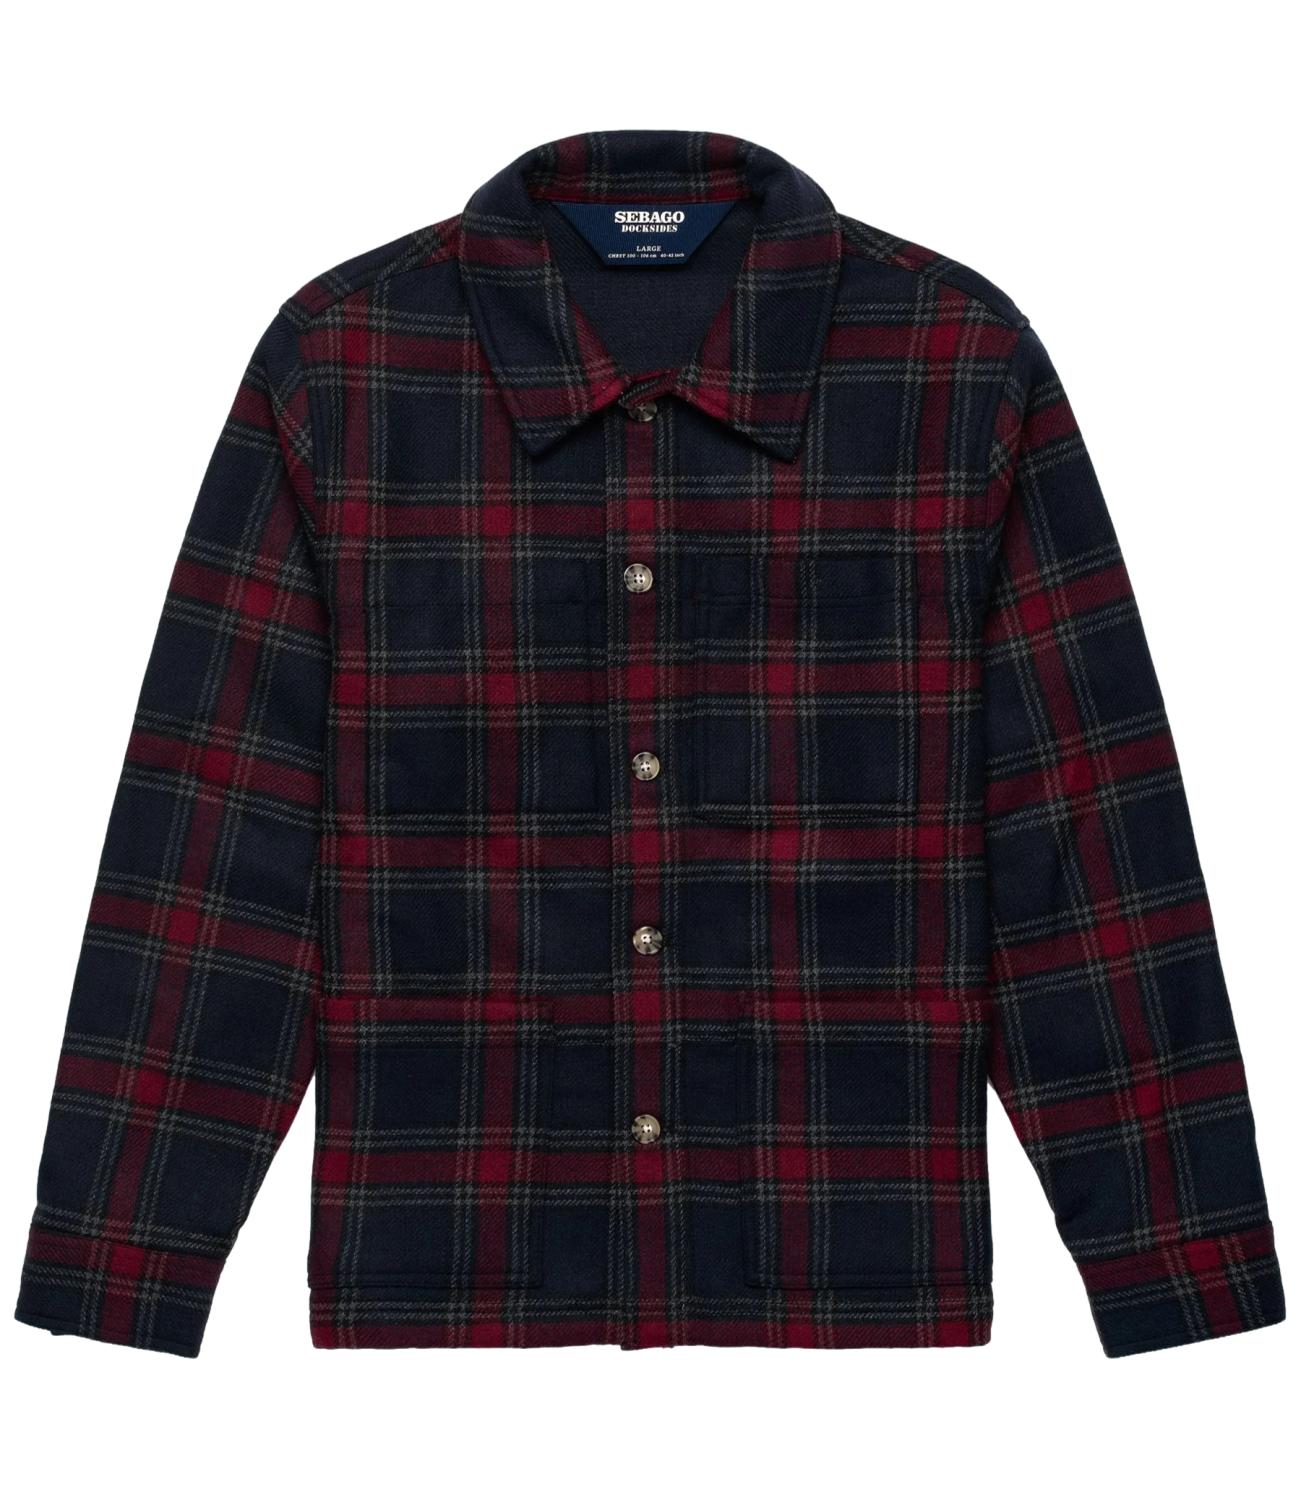 Blue and red check style jacket